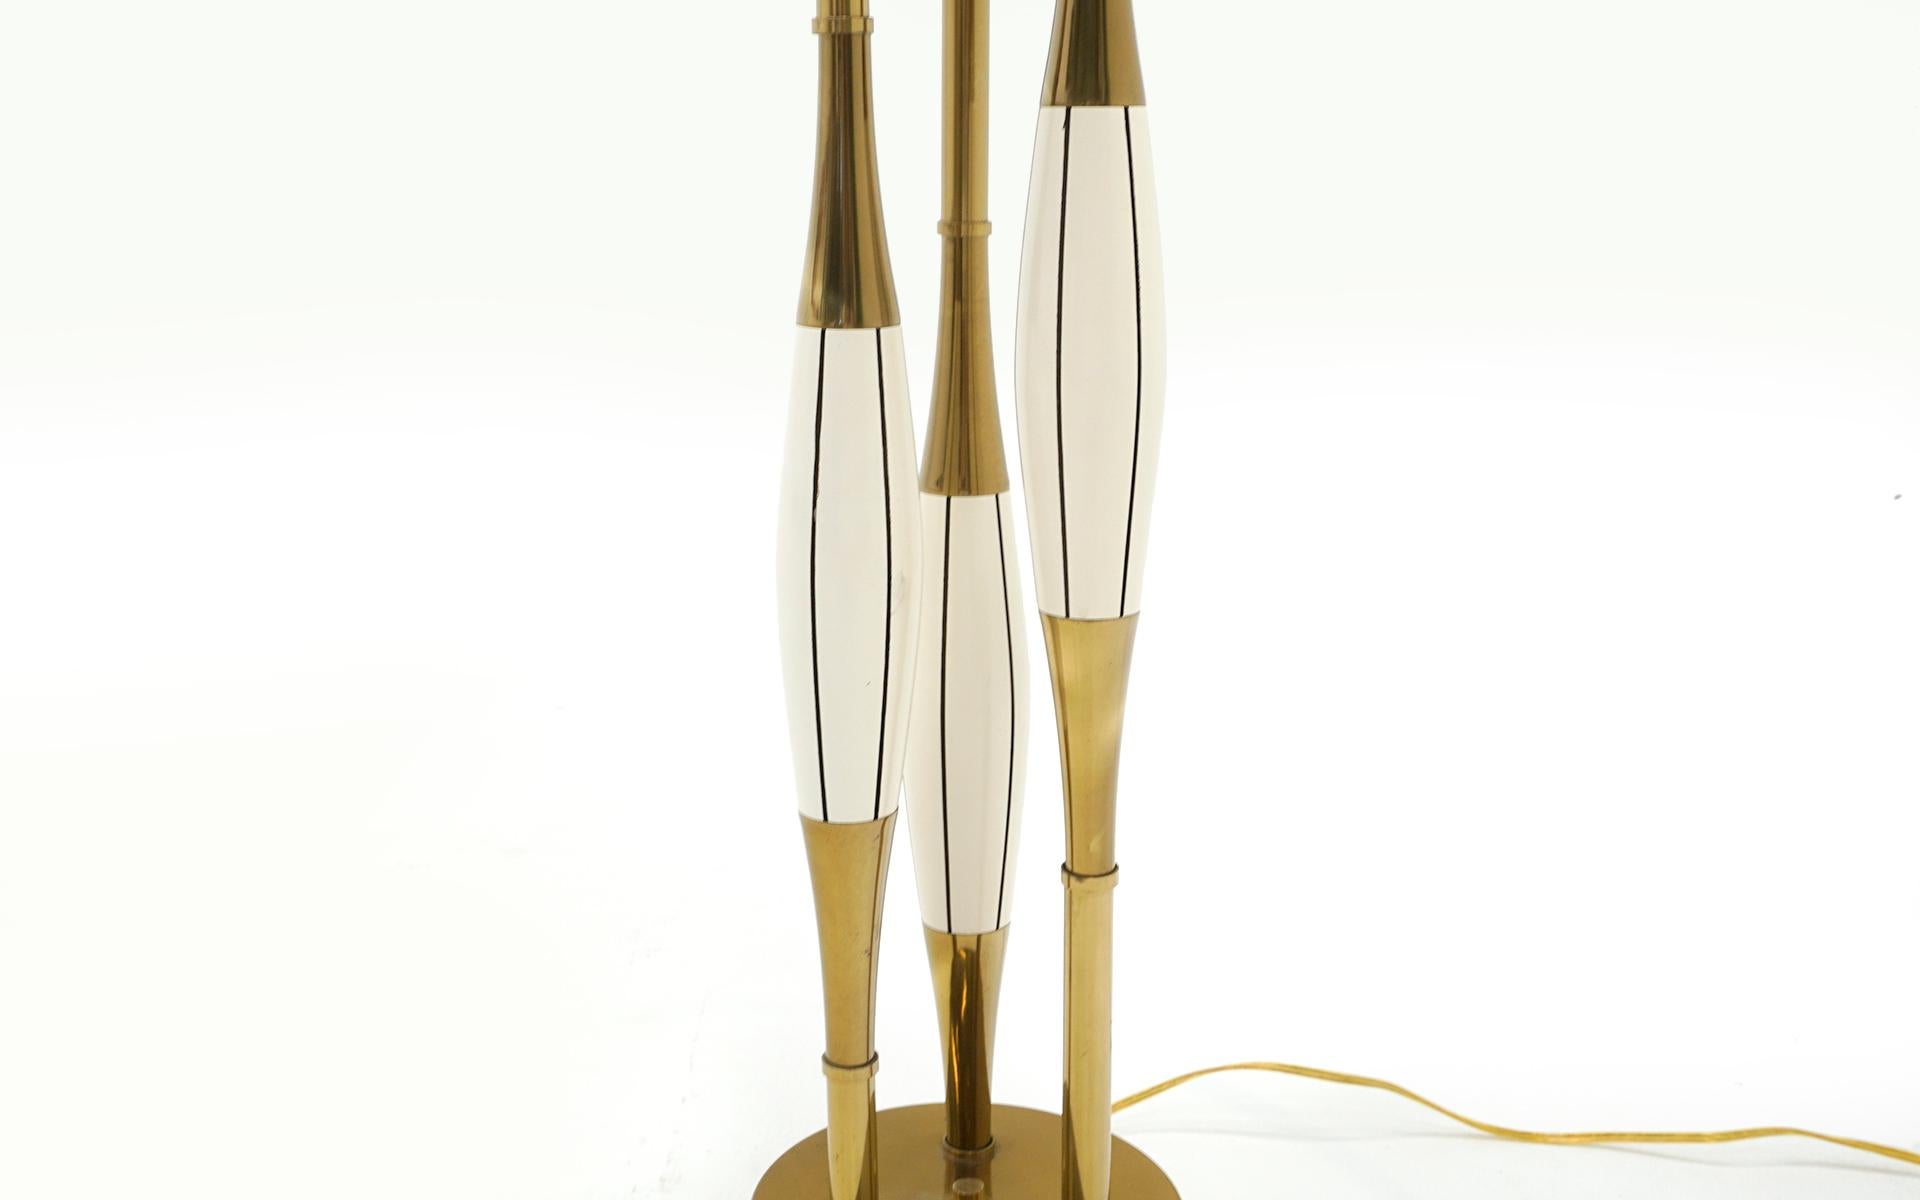 Hollywood Regency Brass & Wood Table Lamp by Stewart Ross James, White, Black Lines Original Shade For Sale